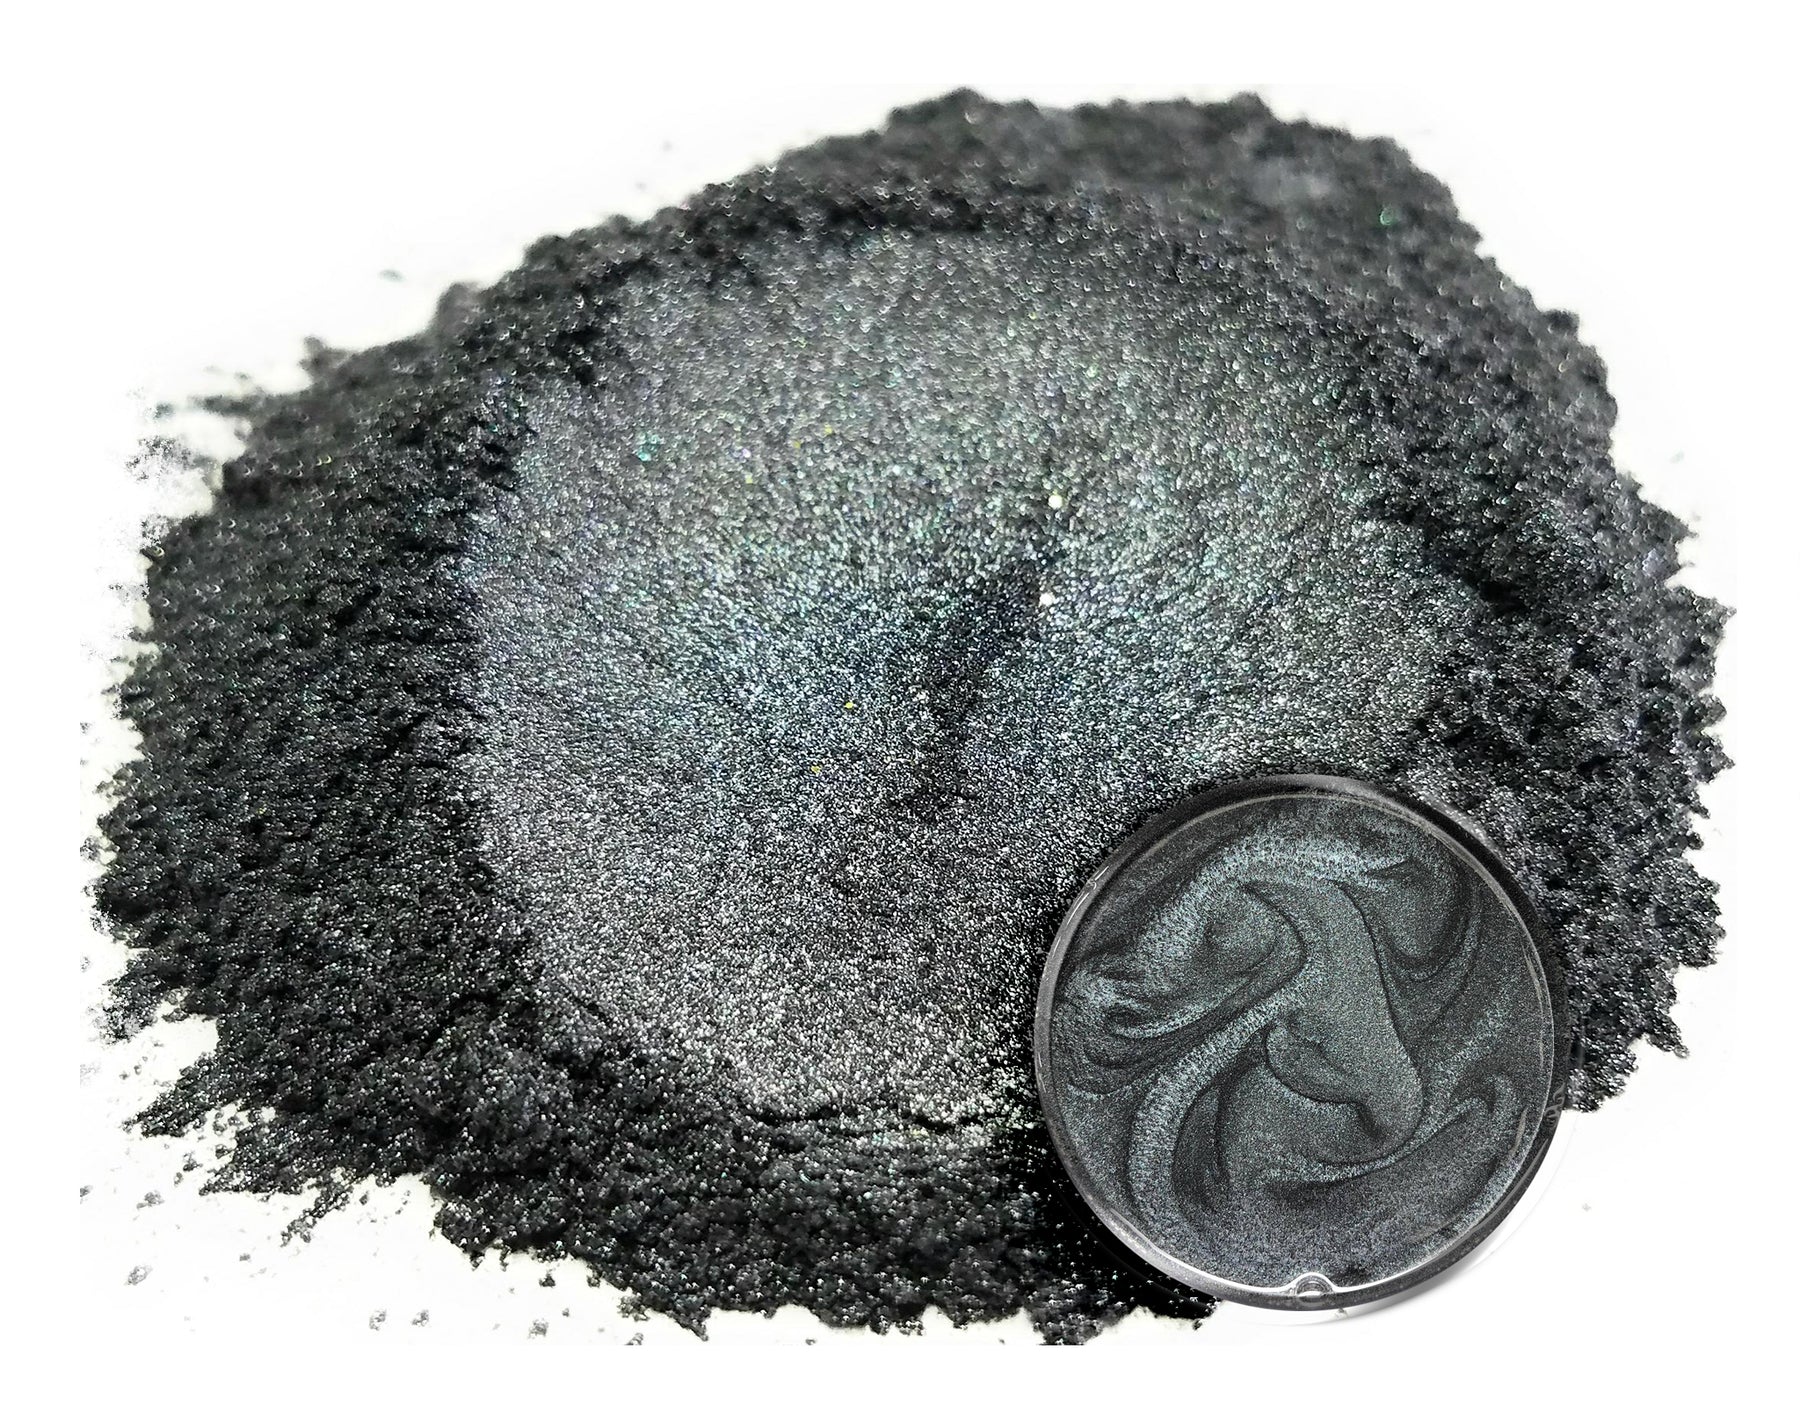 Powdered pigment by eye candy pigments for epoxy resin projects. In the color Storm Grey.